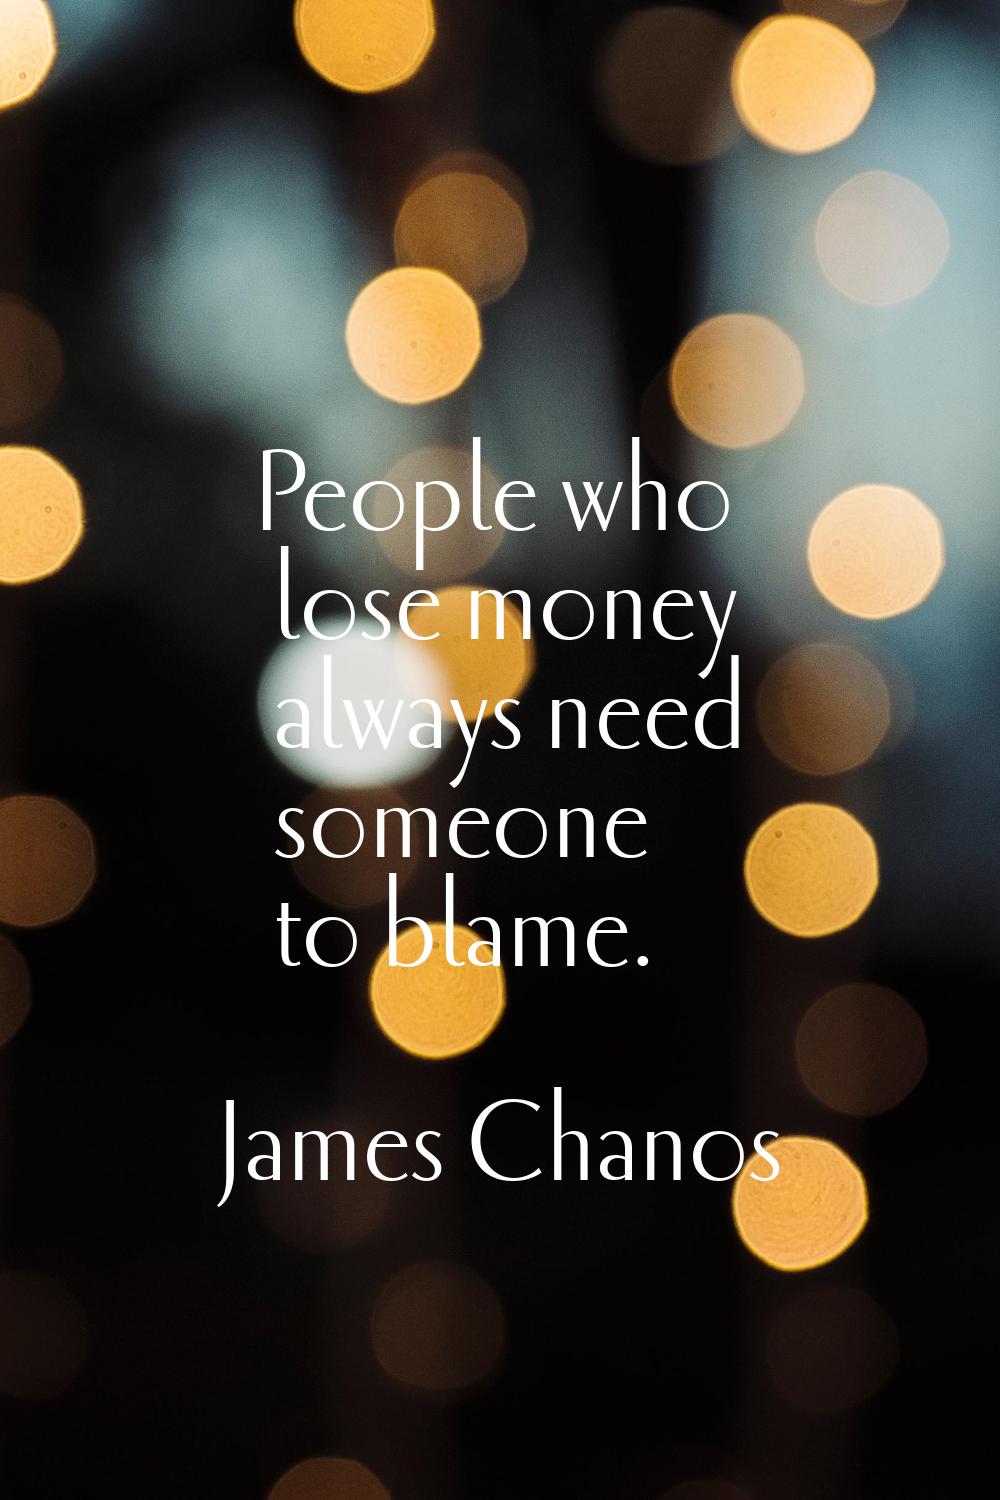 People who lose money always need someone to blame.